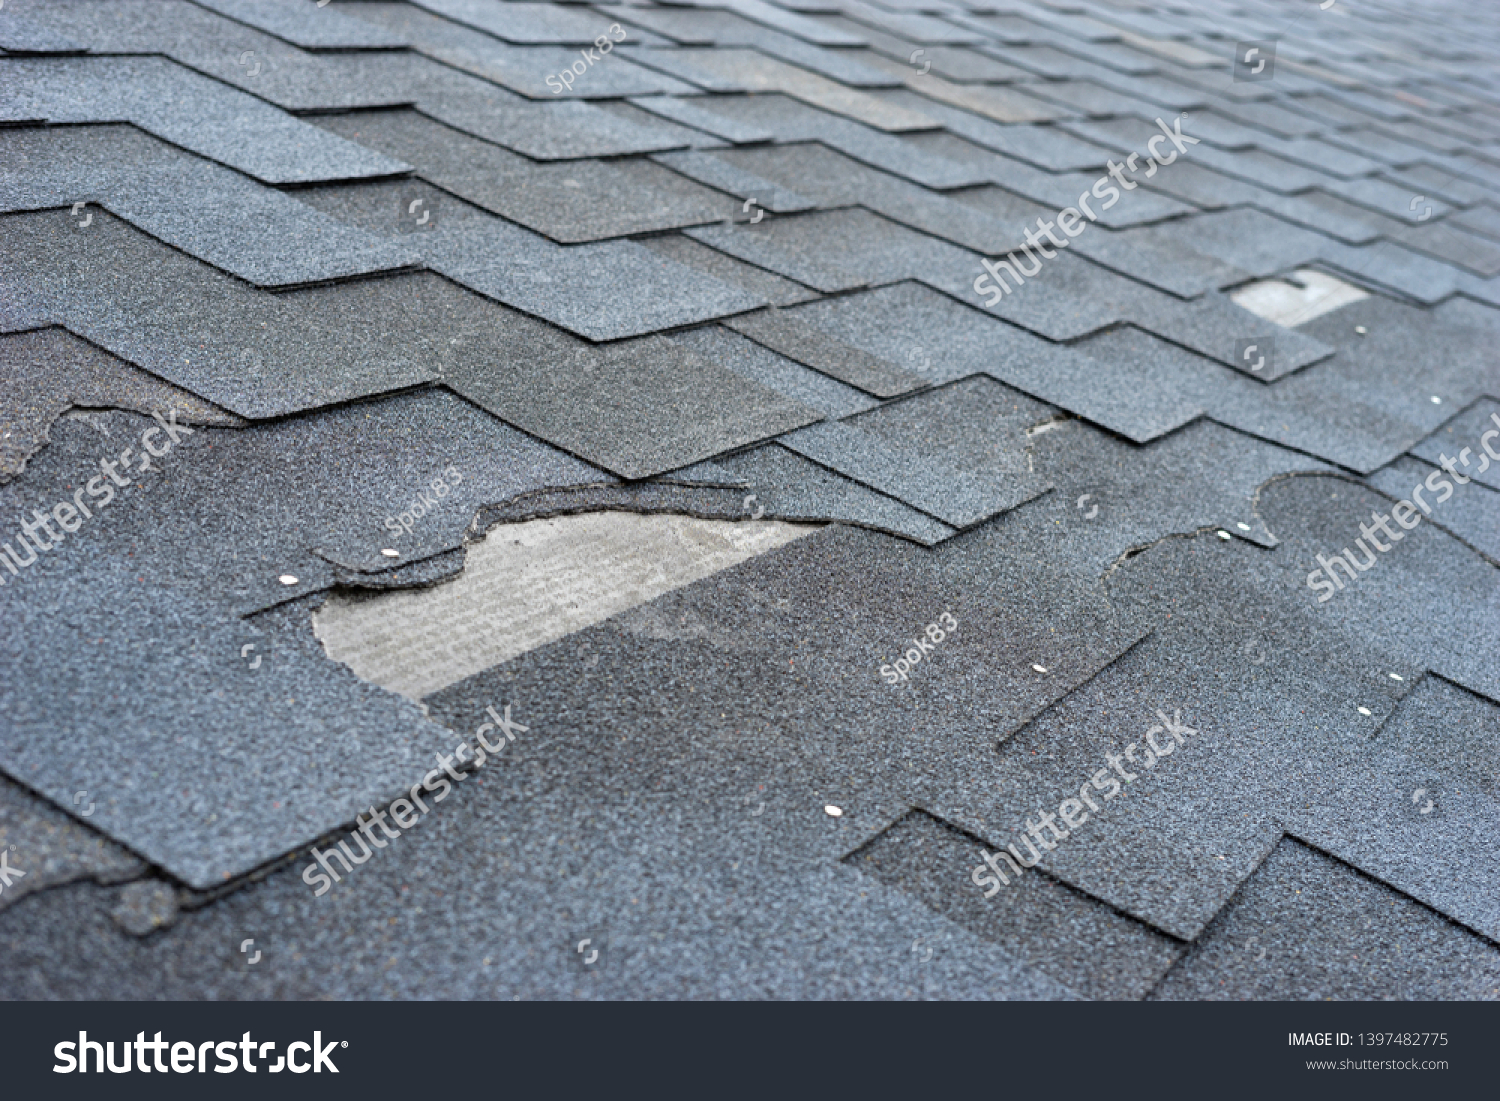 Close up view of asphalt shingles roof damage that needs repair. #1397482775